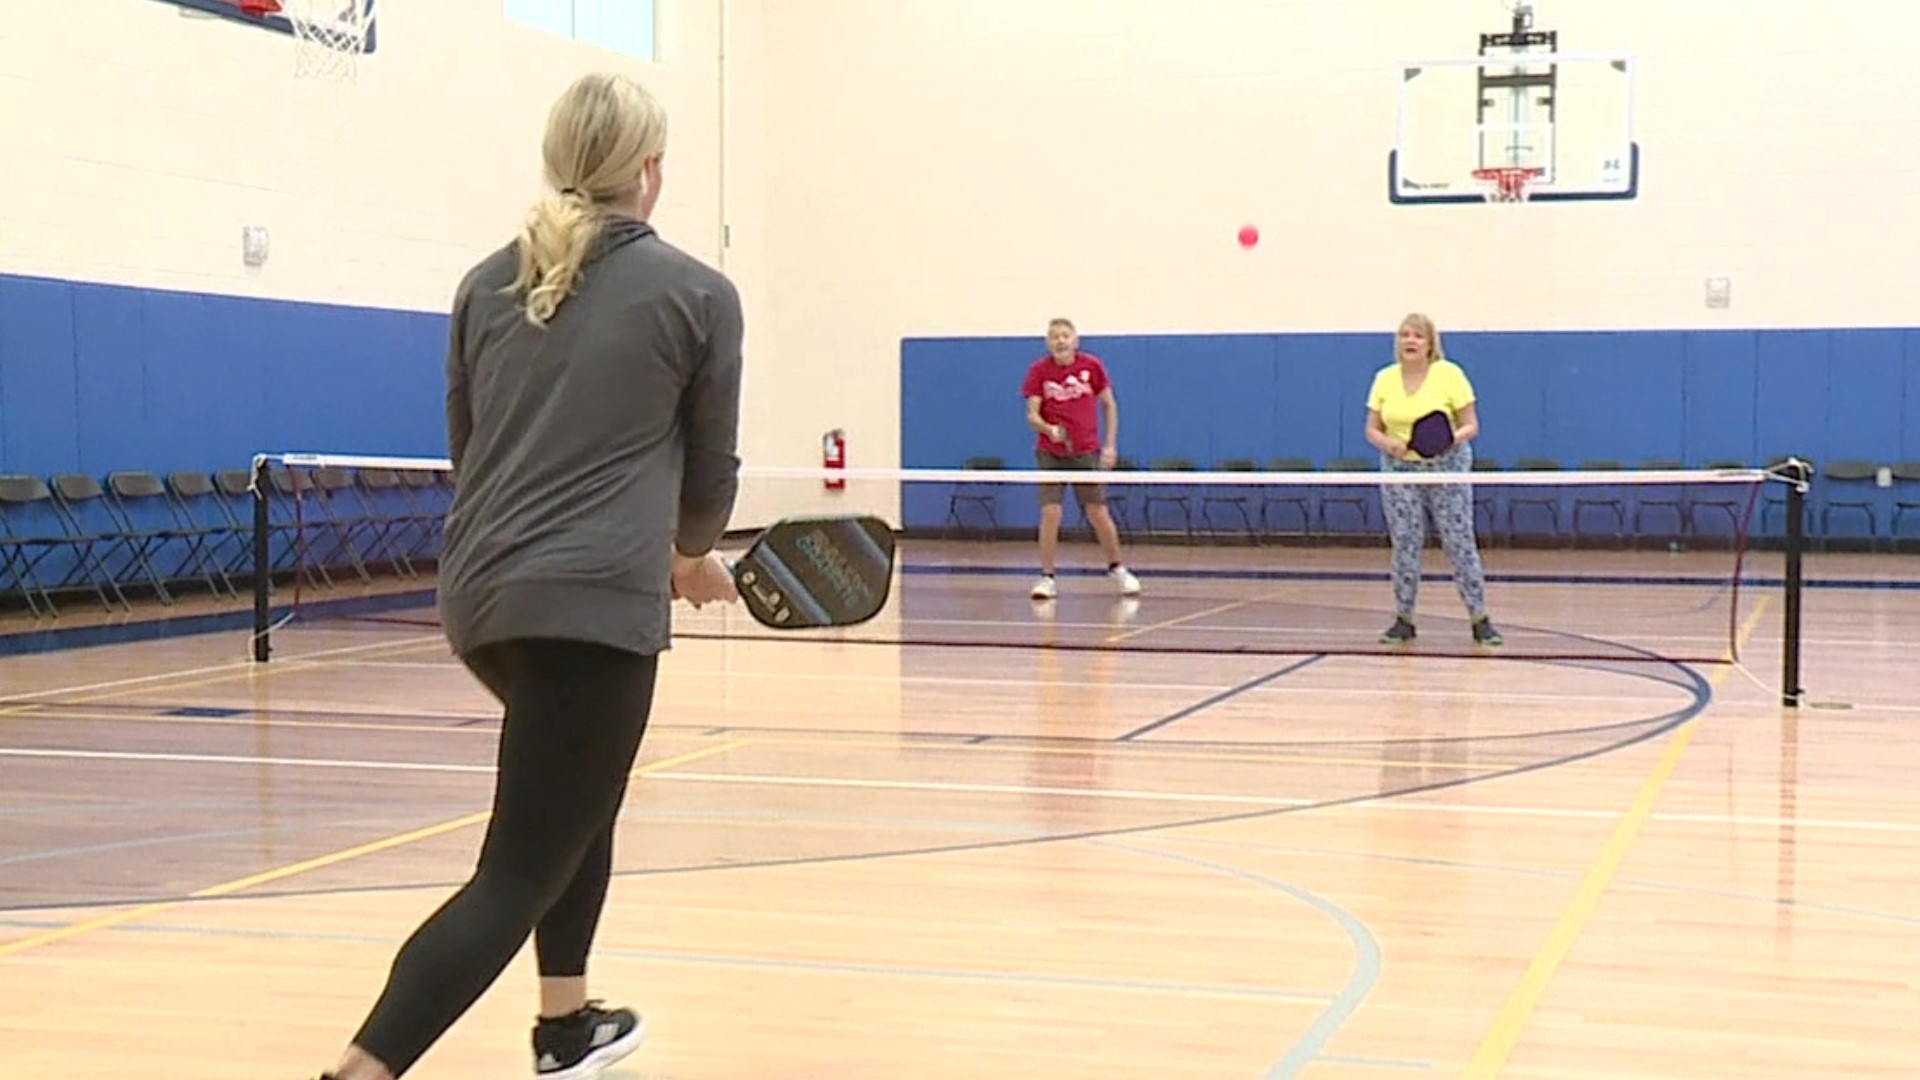 The sport of pickleball is increasing in popularity, but how easy is it to play?